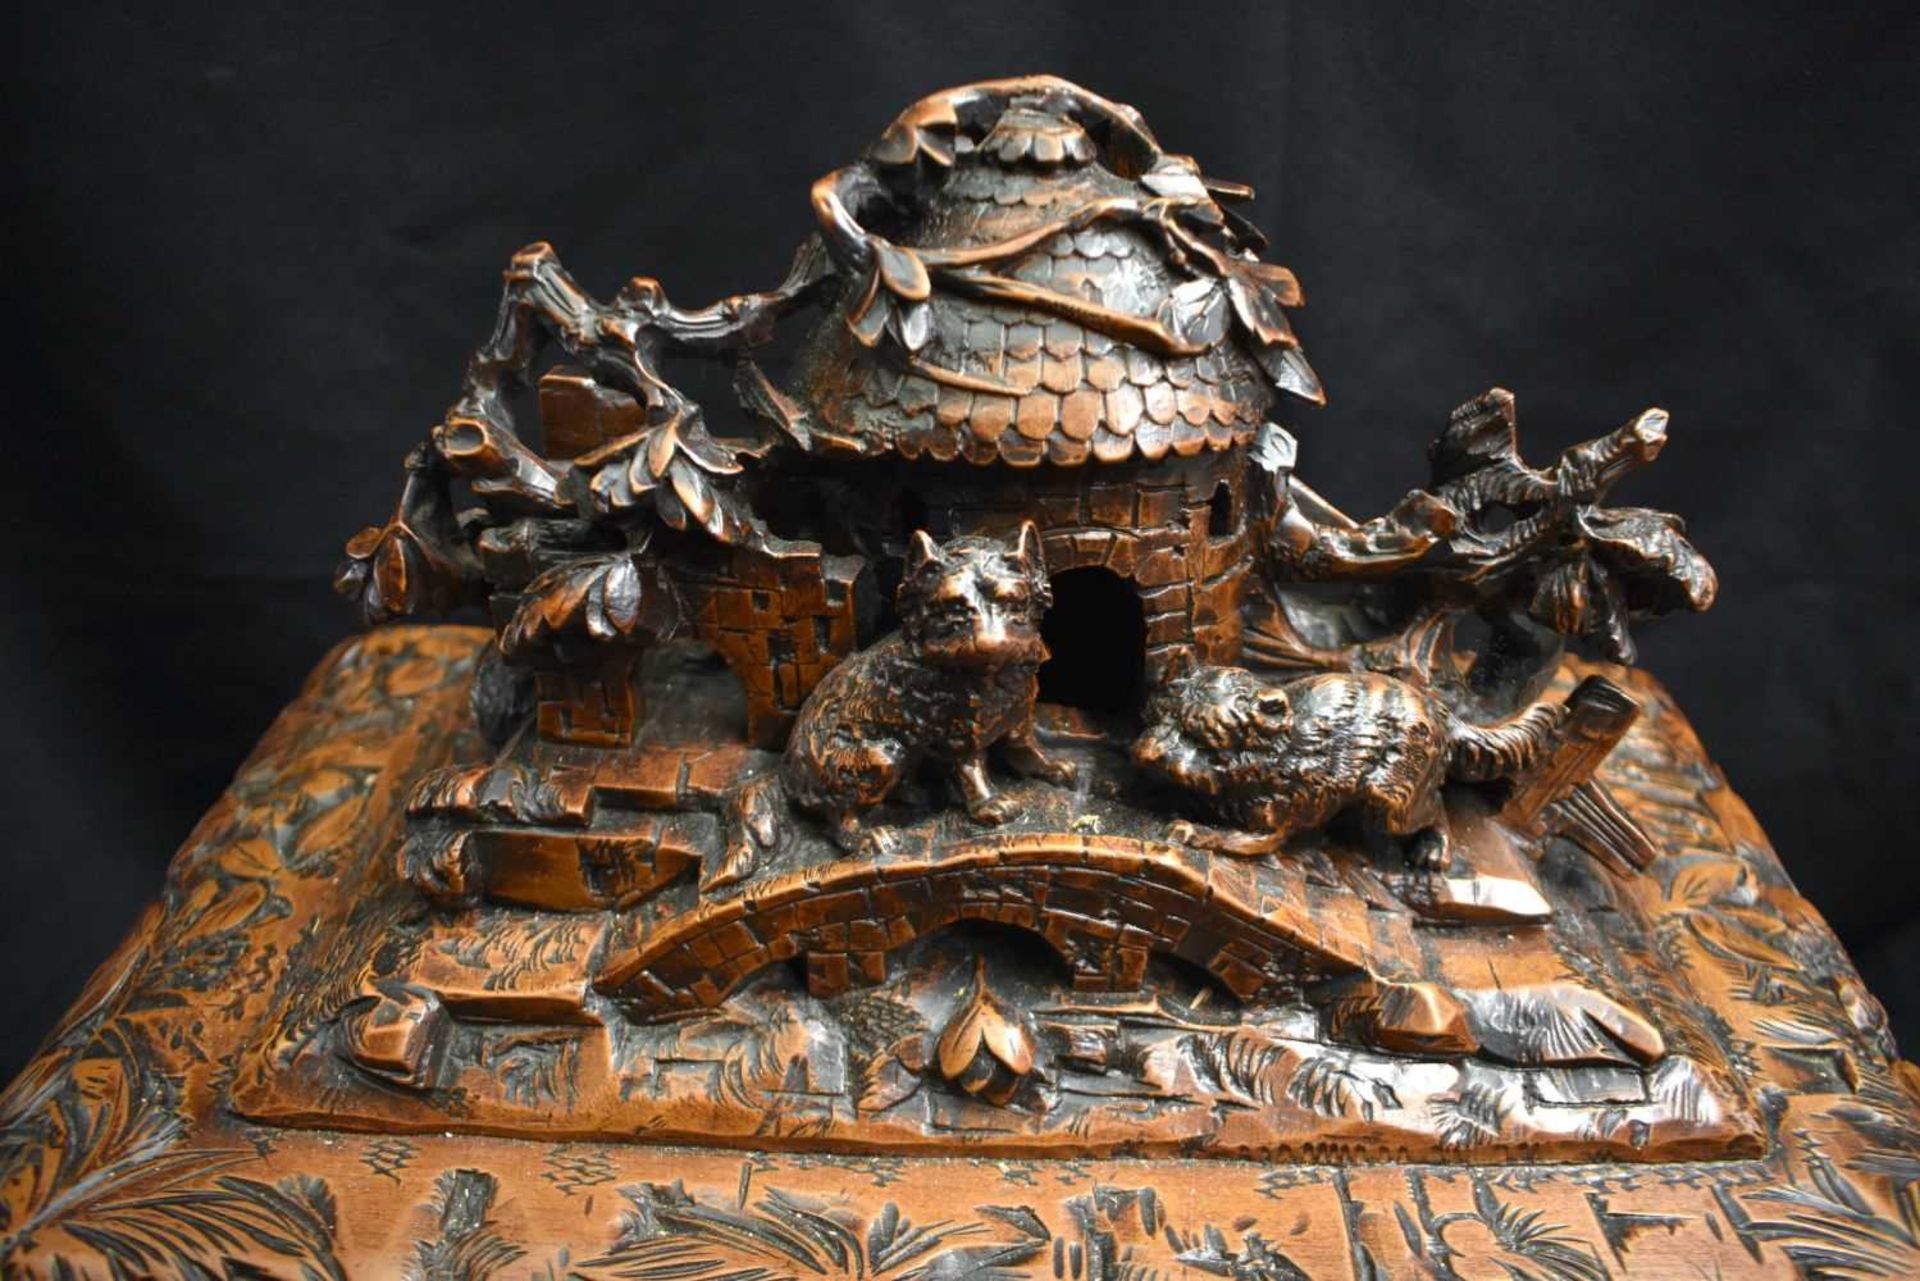 A LOVELY LARGE 19TH CENTURY BAVARIAN BLACK FOREST CARVED WOOD DECANTER BOX formed as an open work - Image 2 of 8